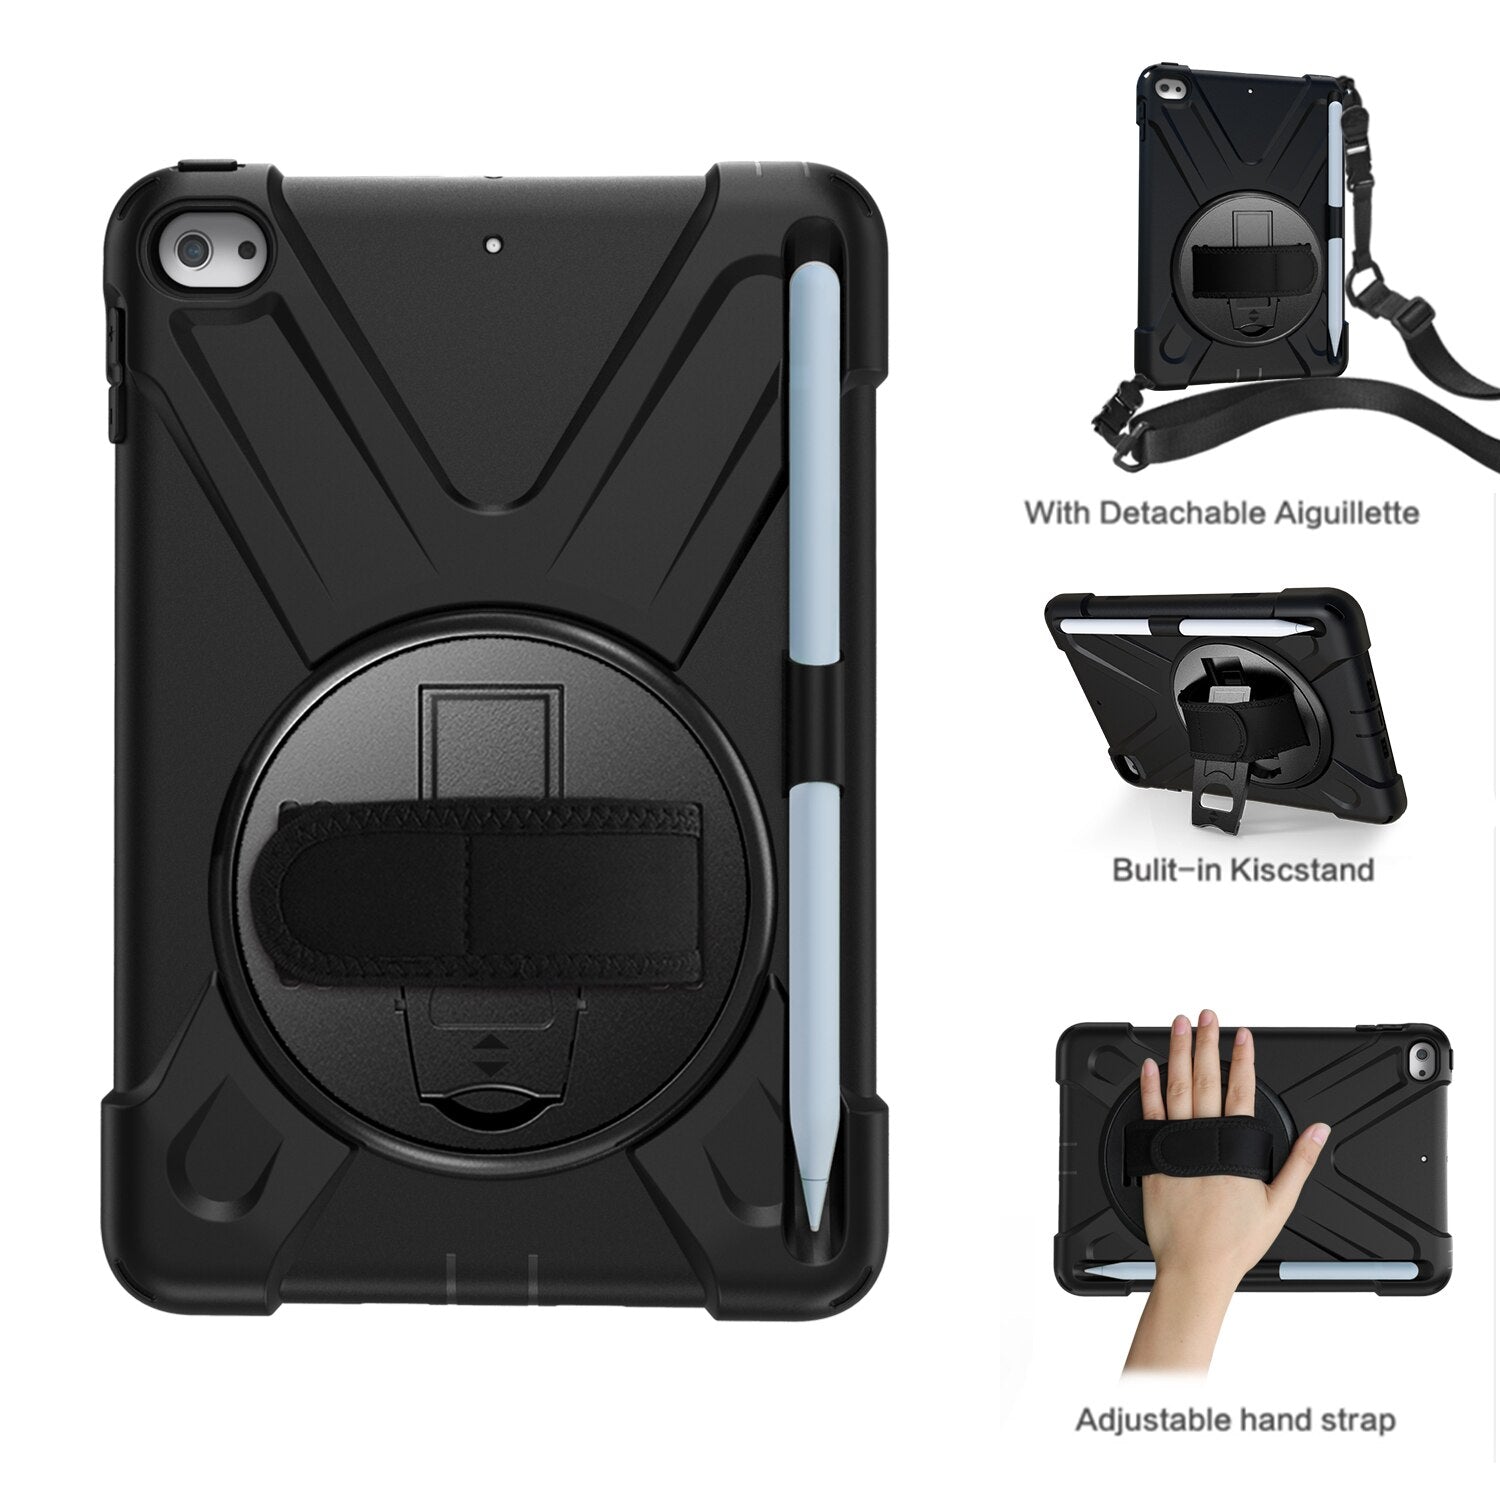 For iPad Mini 4 5 7.9" Case Silicone Shockproof Full Protective Case For iPad Mini 3 2 1 with Pencil Holder 5th Generation Case - 200001091 Black / United States / For iPad Mini 1 2 3 Find Epic Store